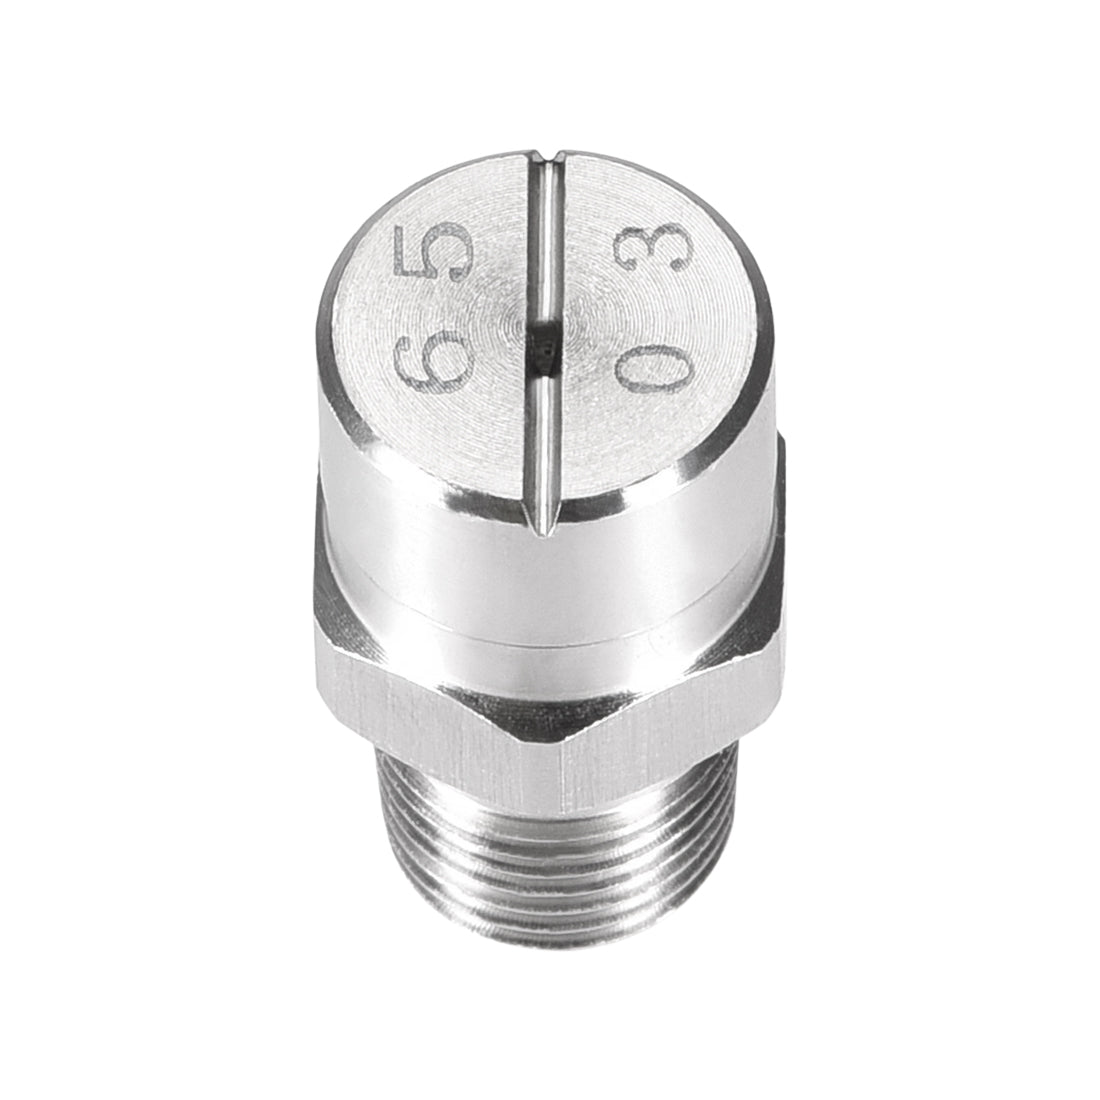 Uxcell Uxcell Flat Fan Spray Tip - 1/8BSPT Male Thread 304 Stainless Steel Nozzle - 65 Degree 2mm Orifice Diameter - 2 Pcs